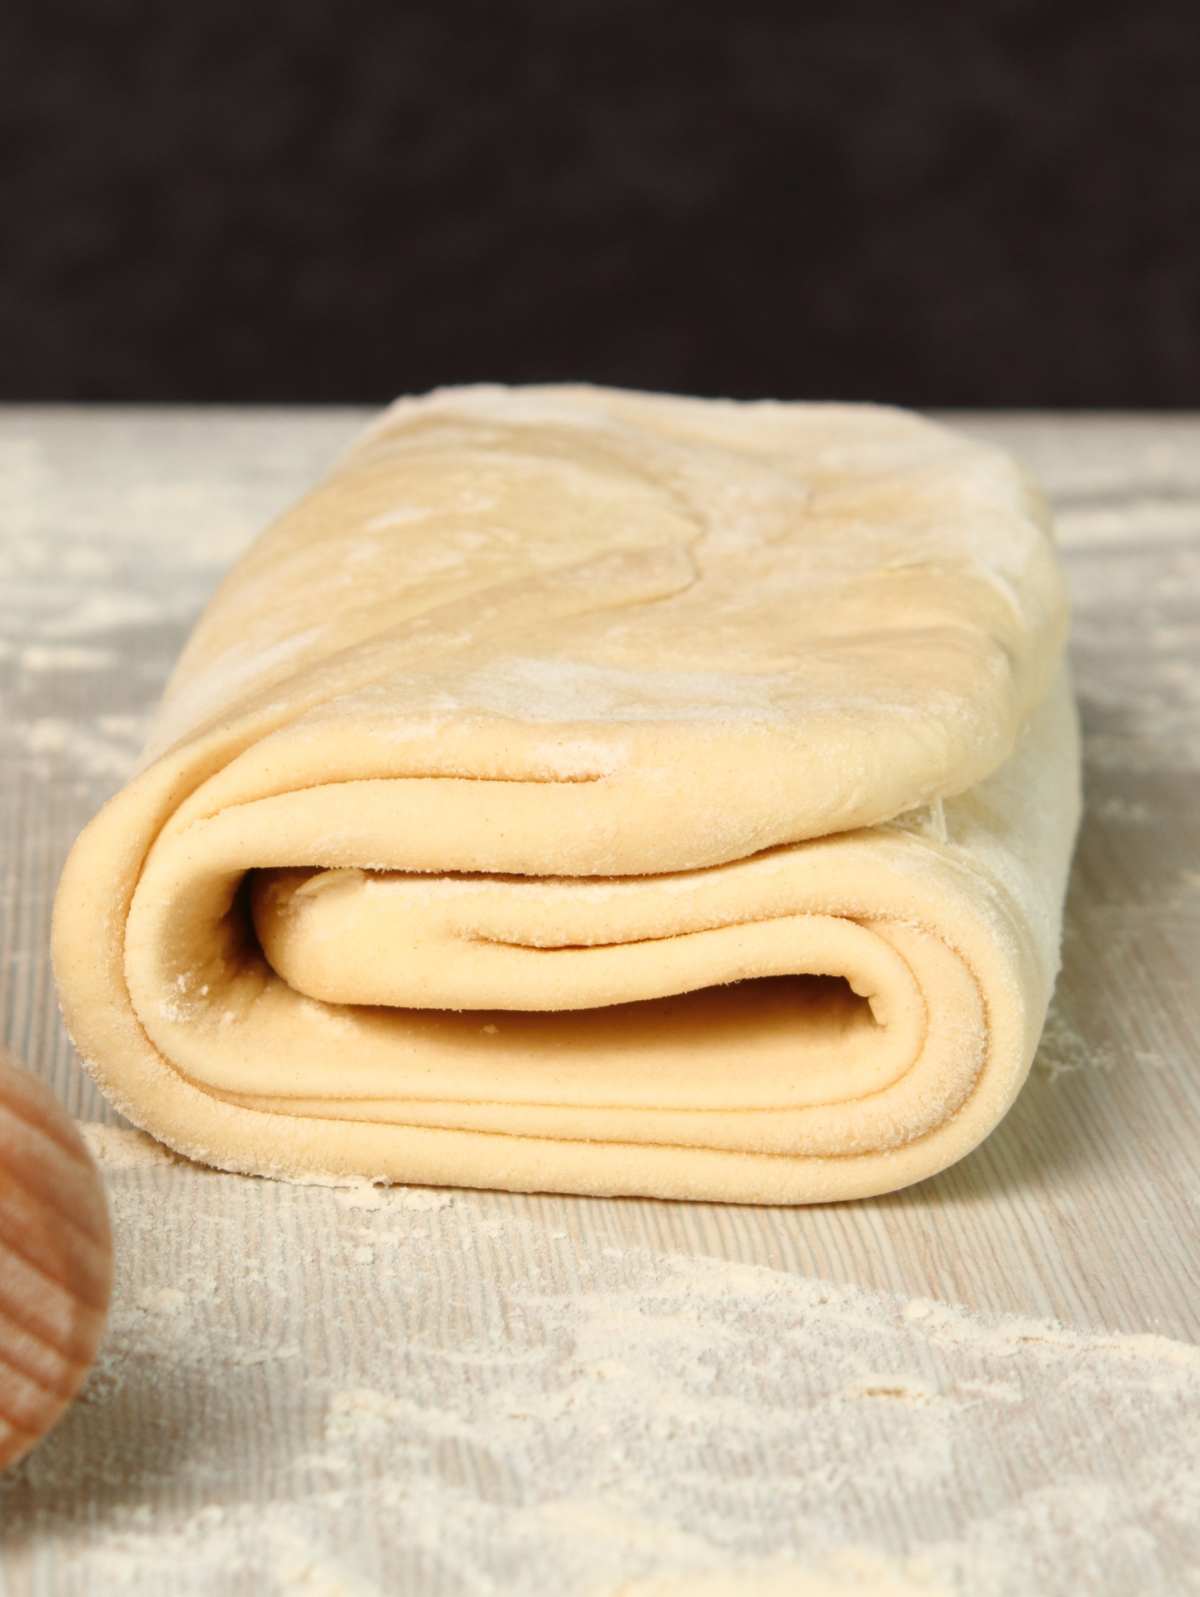 Vegan puff pastry folded into thirds like a letter.